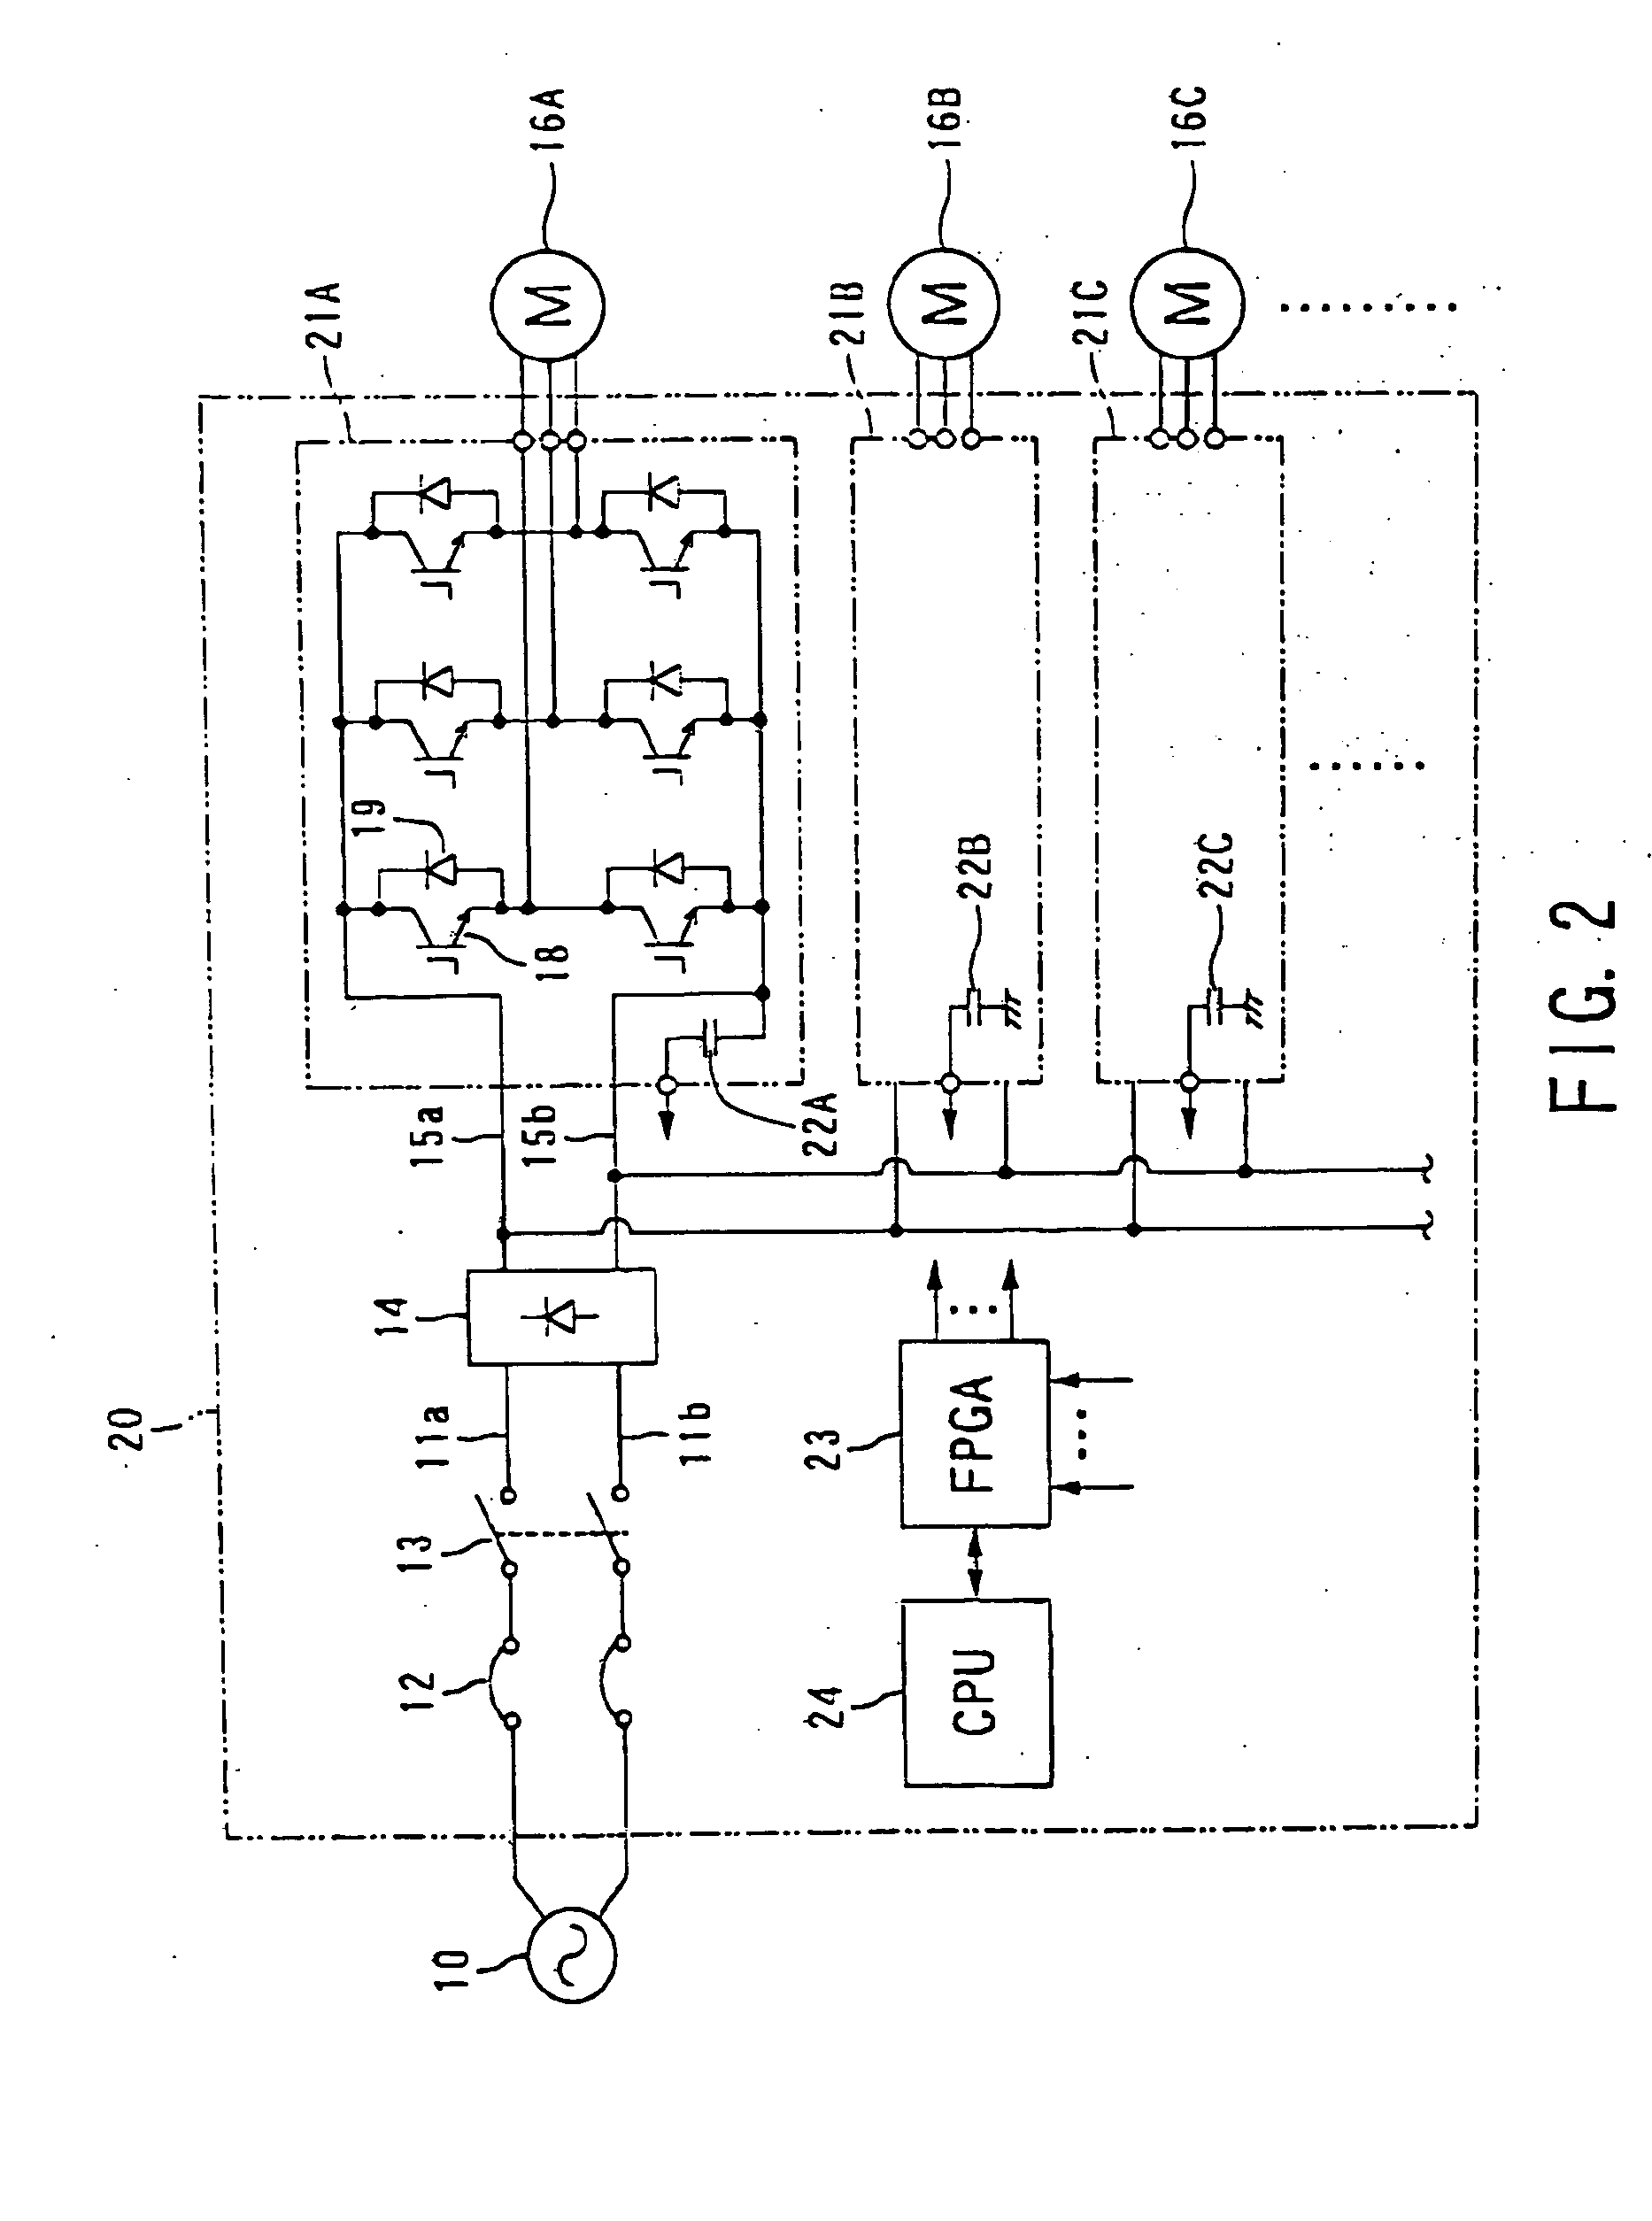 Apparatus and method for controlling drive of plural actuators